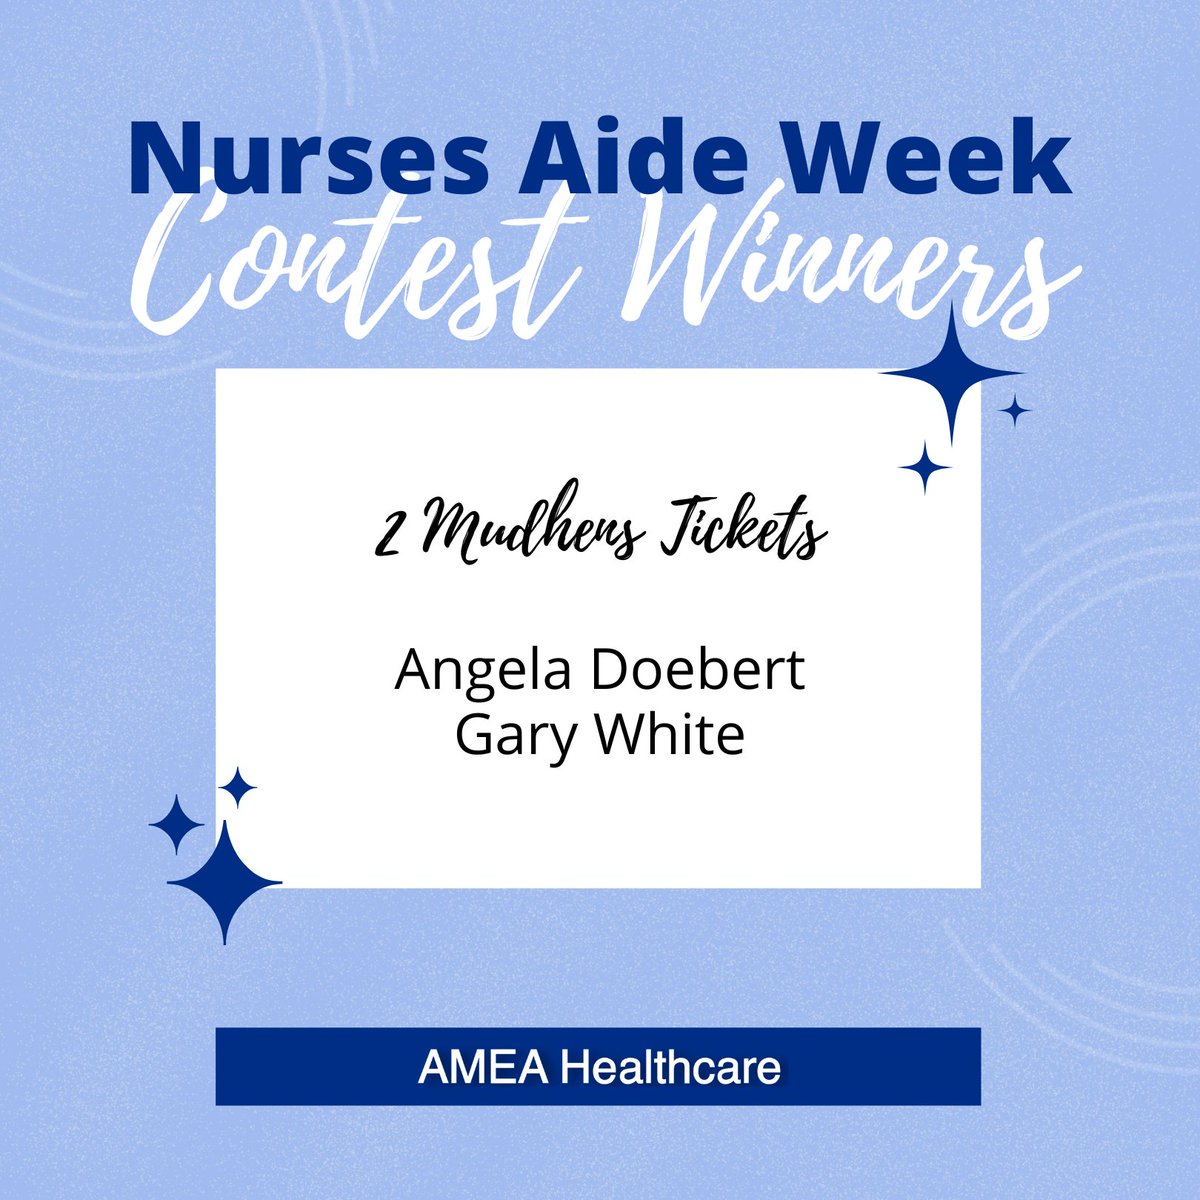 We're celebrating National Nurses Aide Week all week long! The winners of our first two drawings are: Angela Doebert and Gary White.

Congratulations!

#NationalNursesAideWeek #Giveaway #AMEAHealthcare #HealthcareStaffing #HealthcareJobs #RNJobs #LPNJobs #STNAJobs #HHAJobs